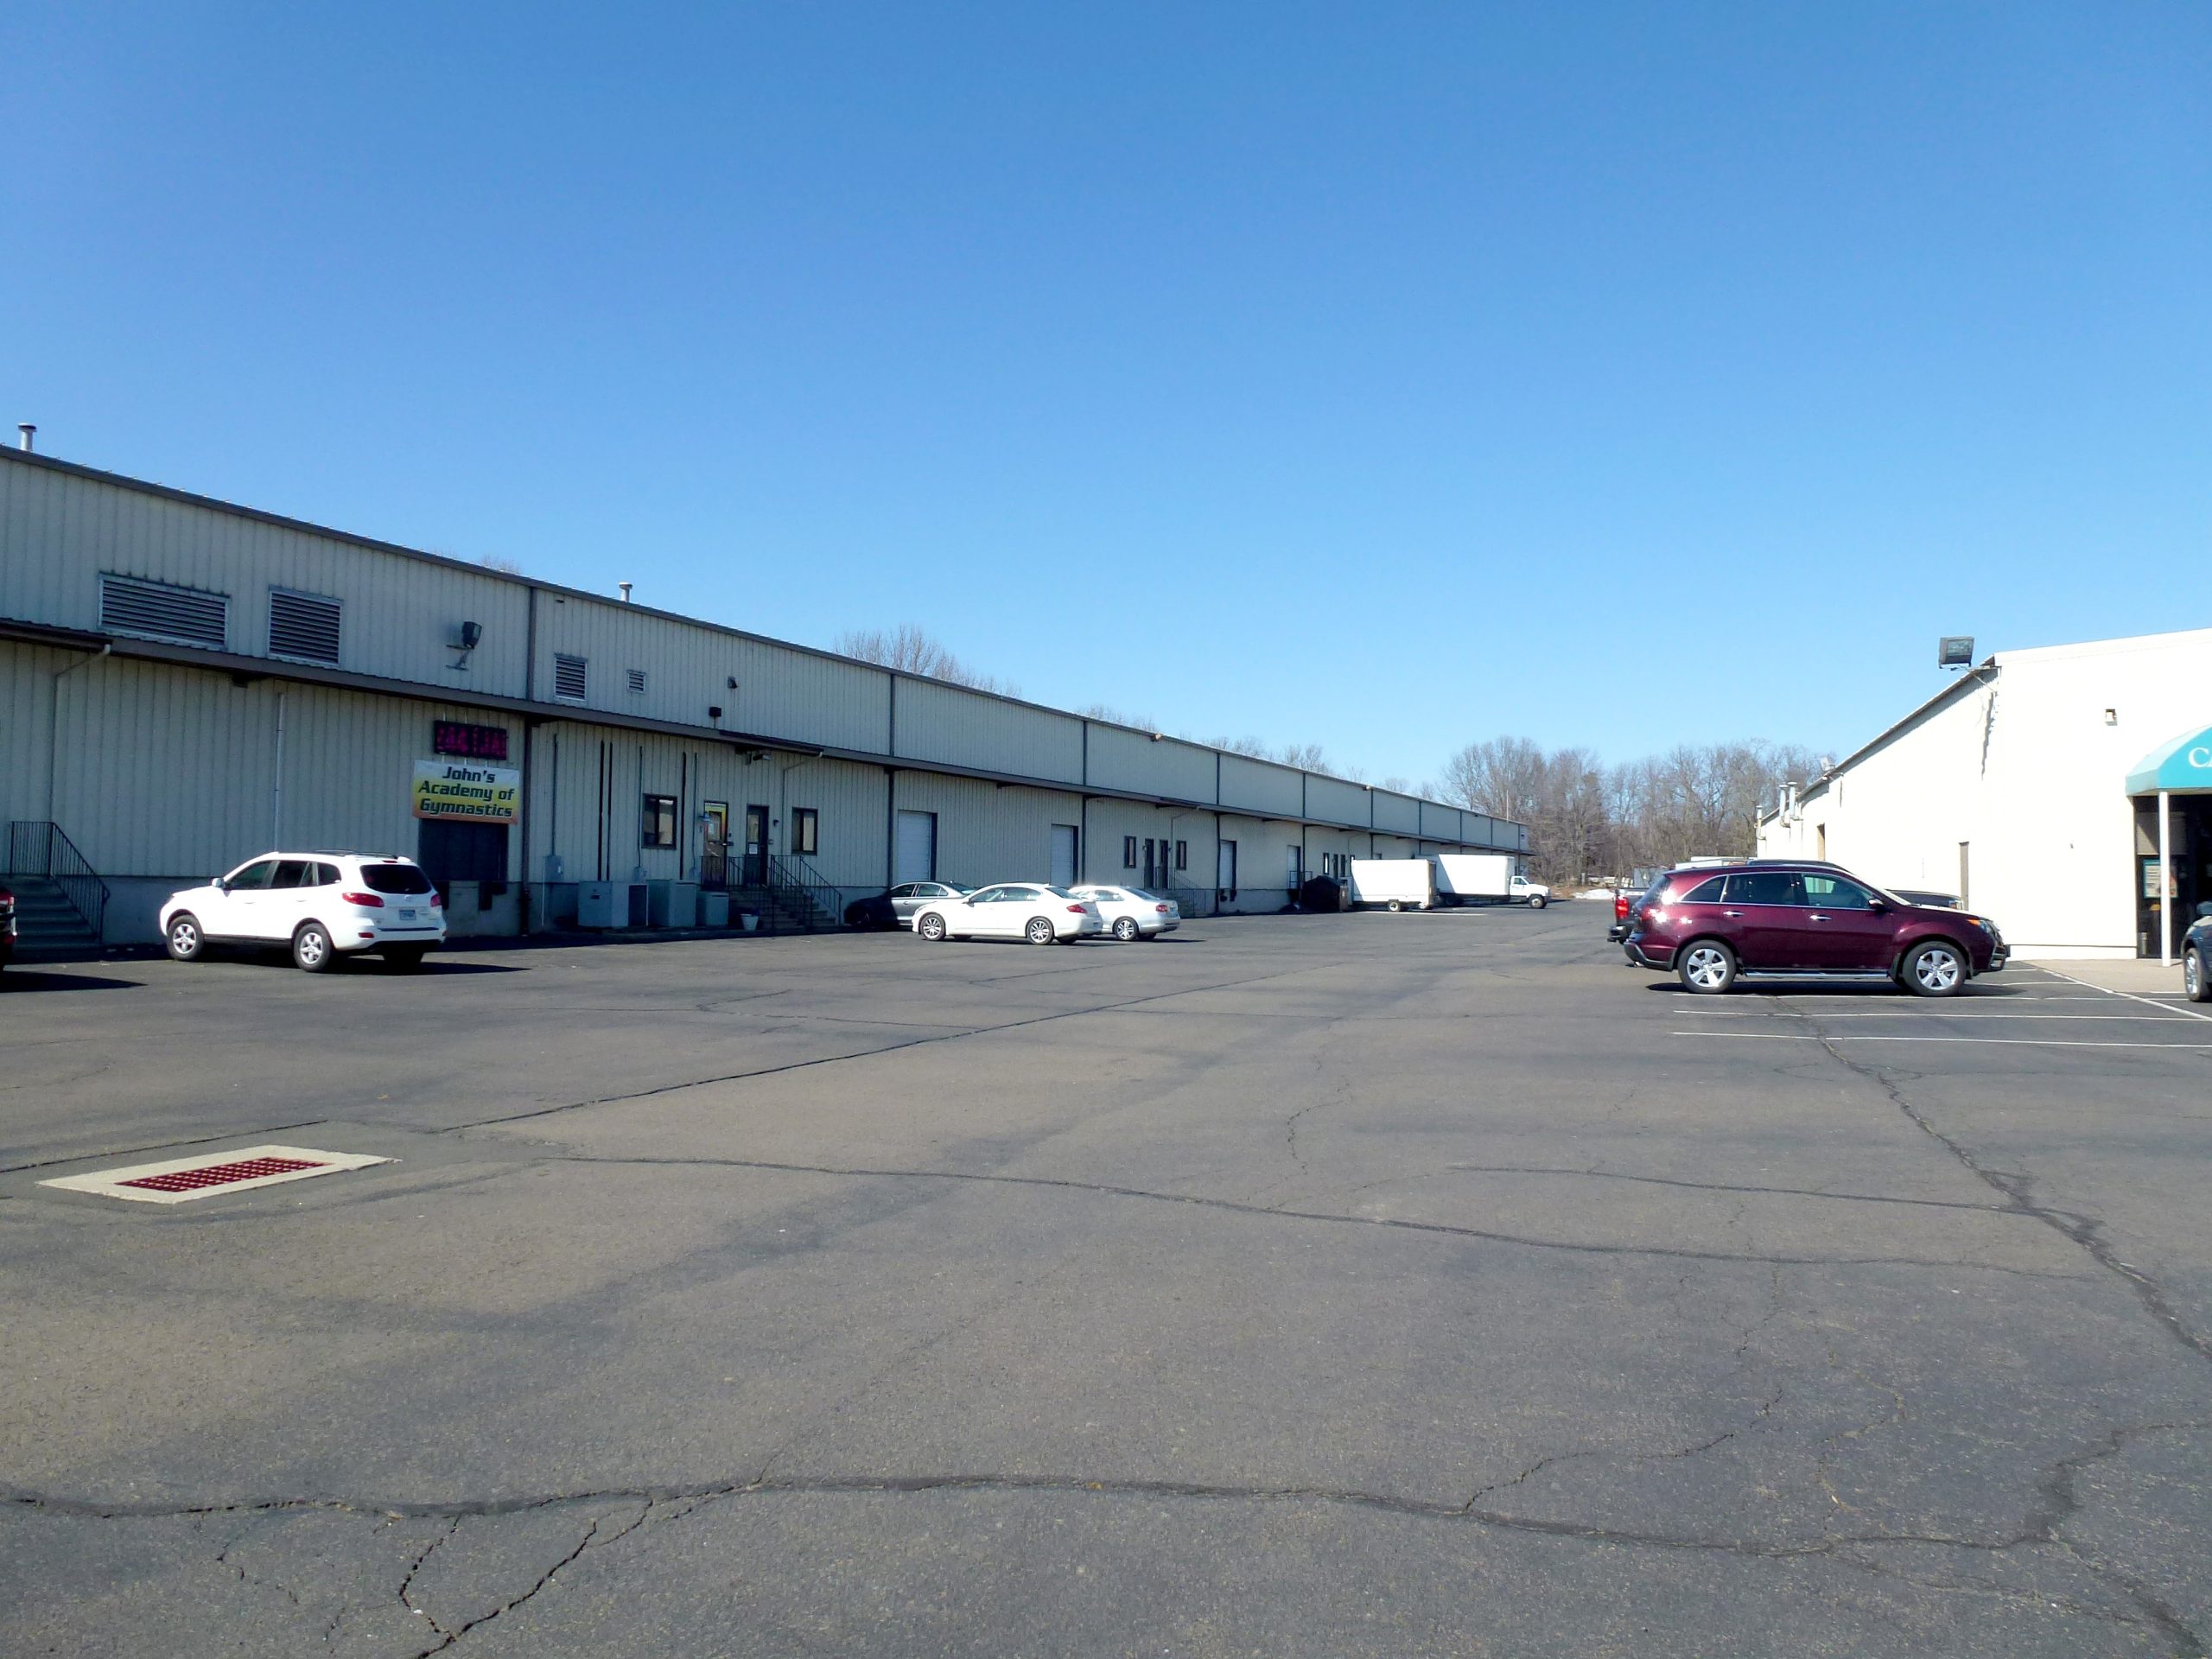 O,R&L Commercial Leases 15,000 SF Warehouse Distribution Space, Wallingford, CT